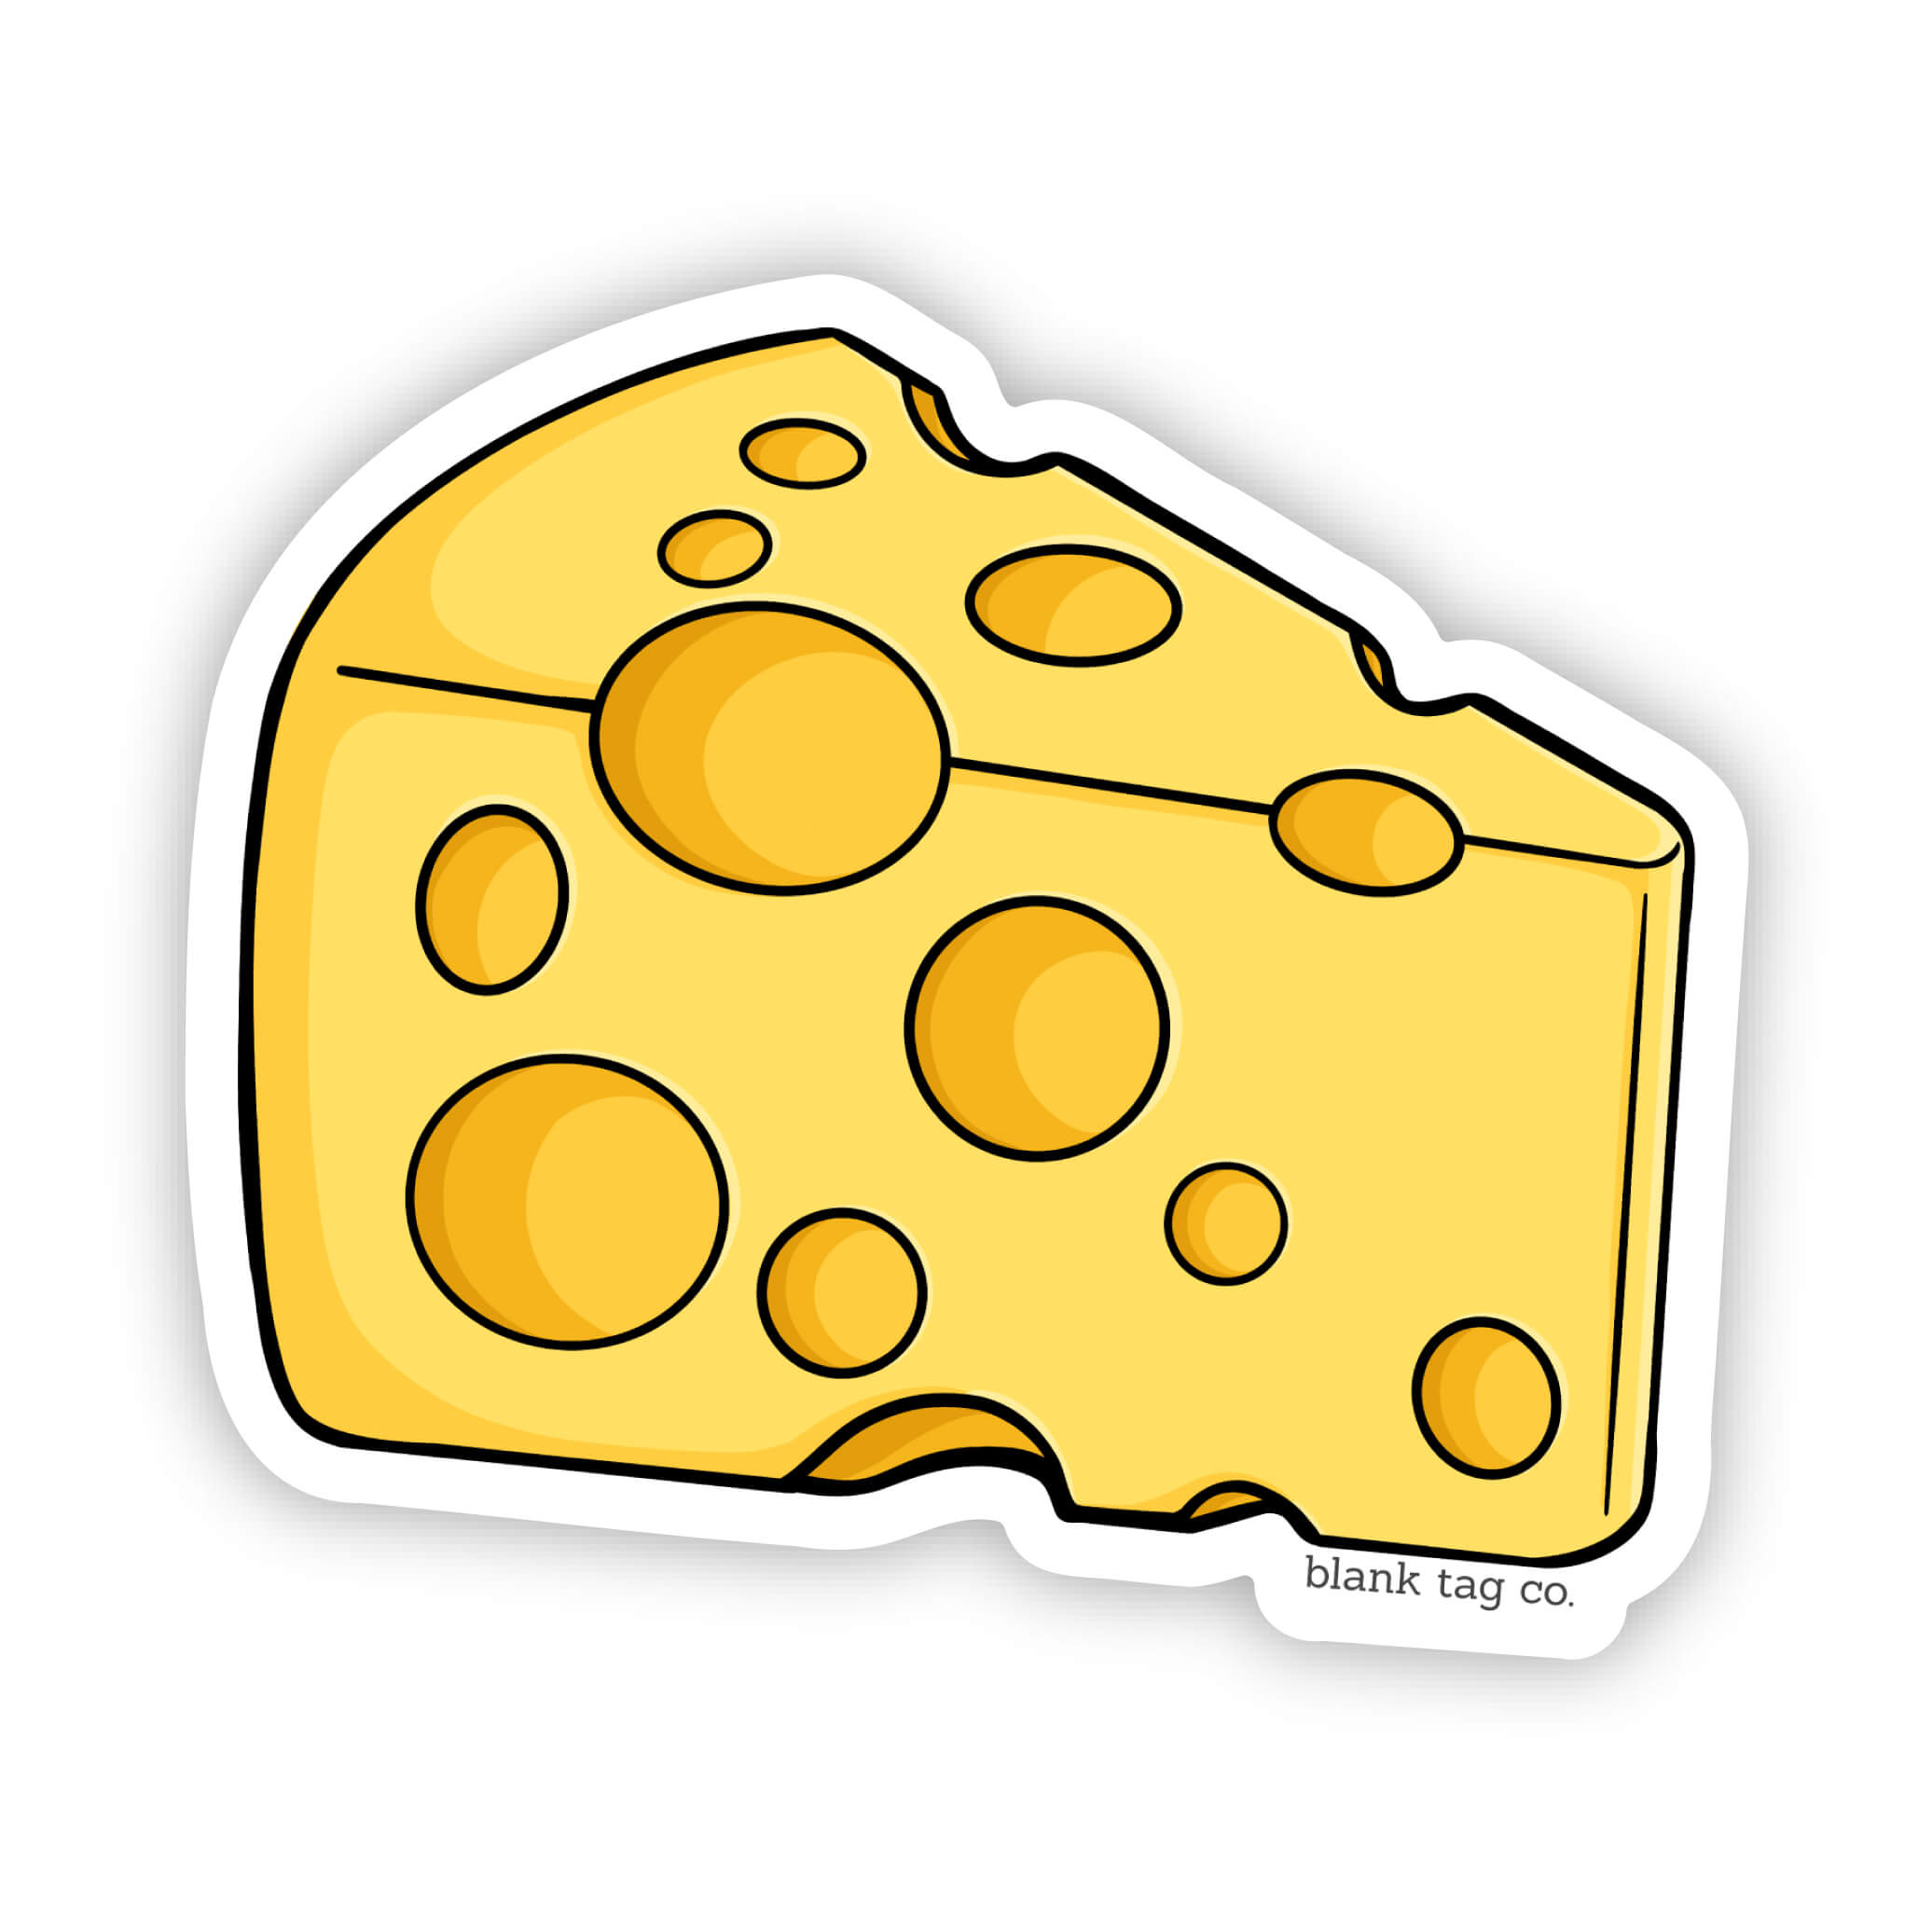 The Cheese Sticker